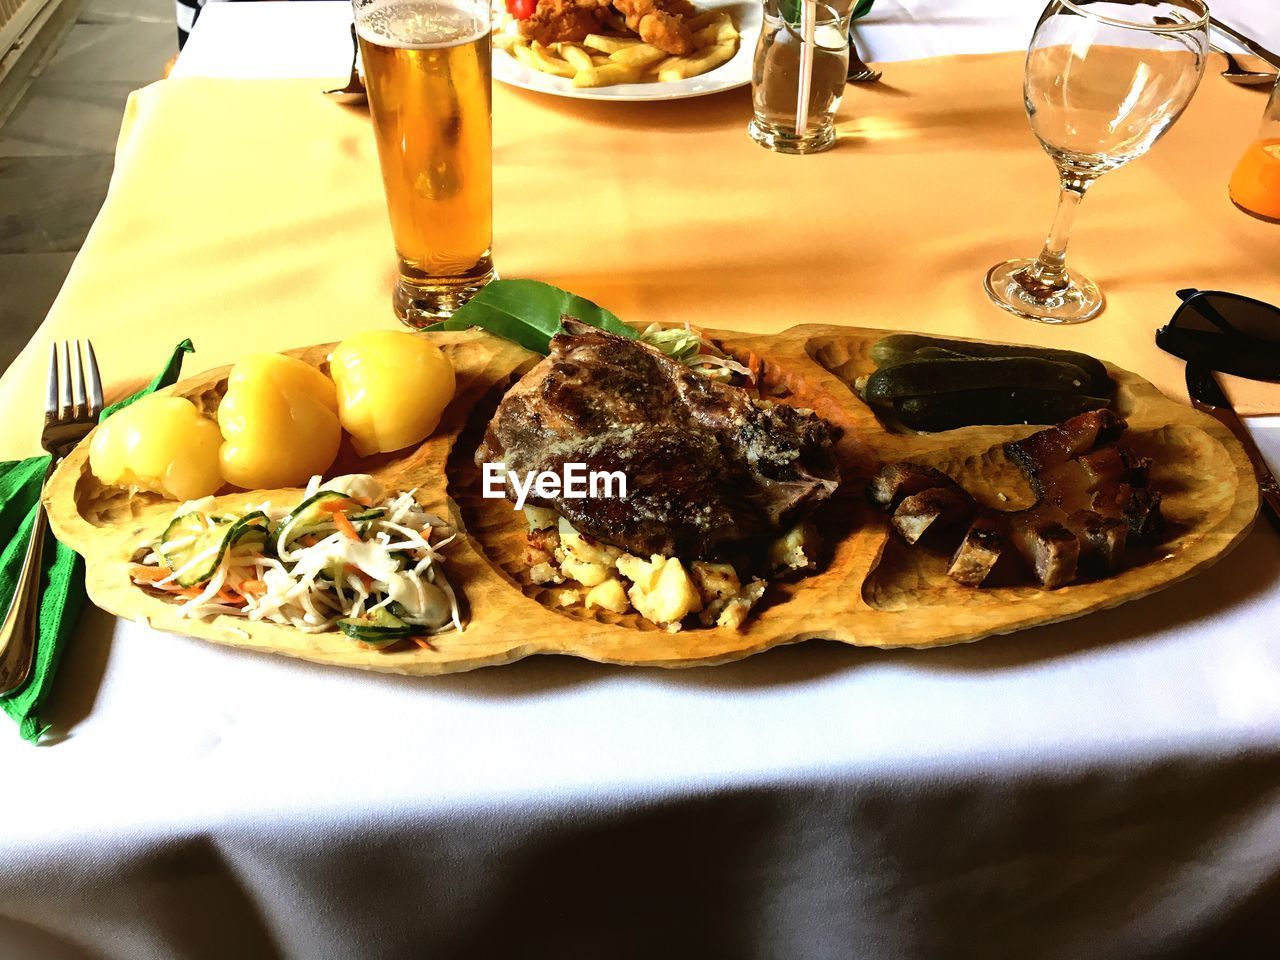 CLOSE-UP OF SERVED FOOD ON TABLE